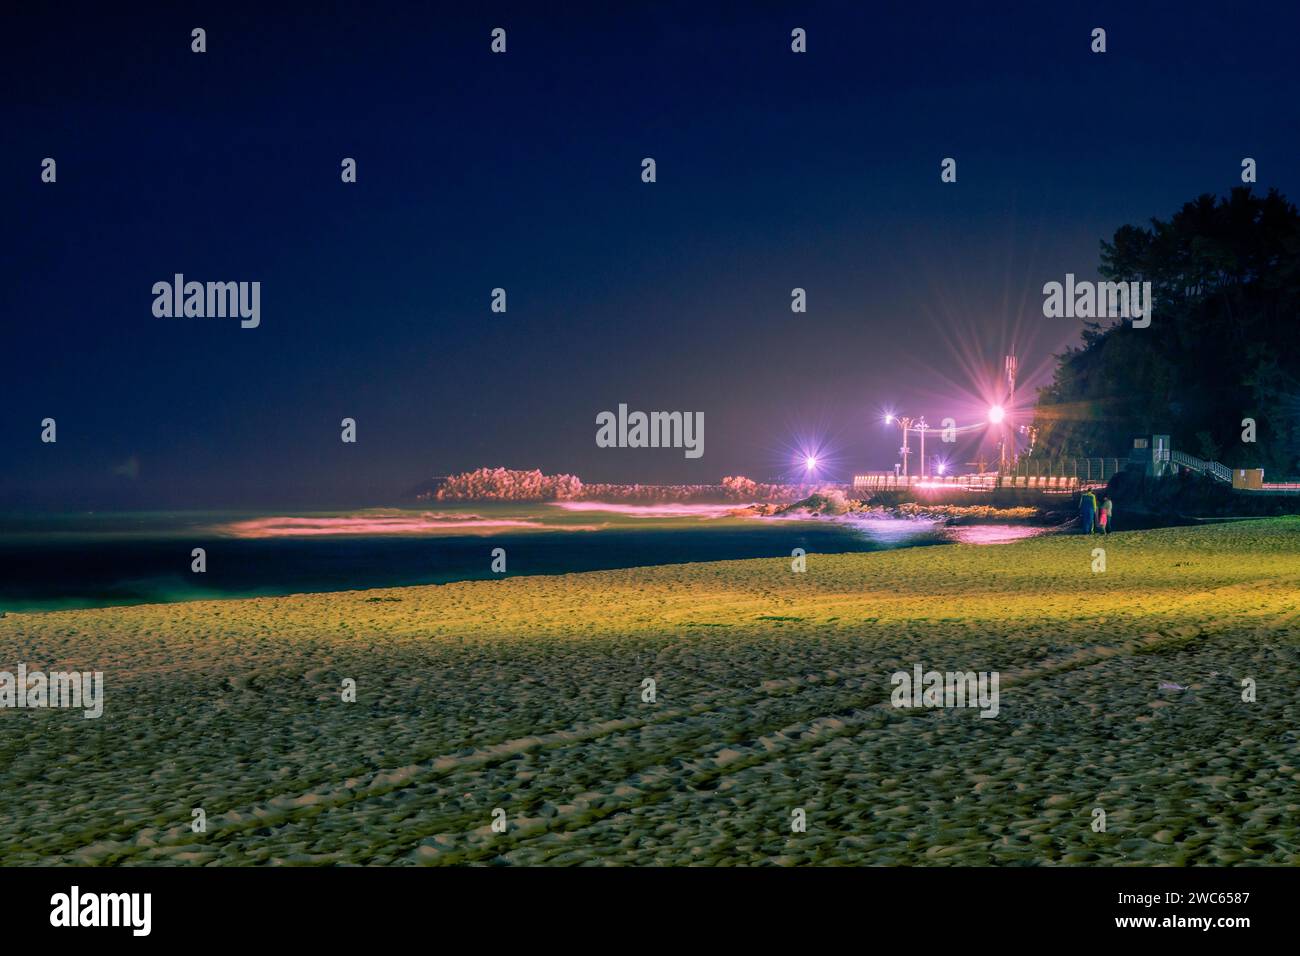 Night scene at beach bathed in soft light with unrecognizable people and pier lit up by street lights in background Stock Photo